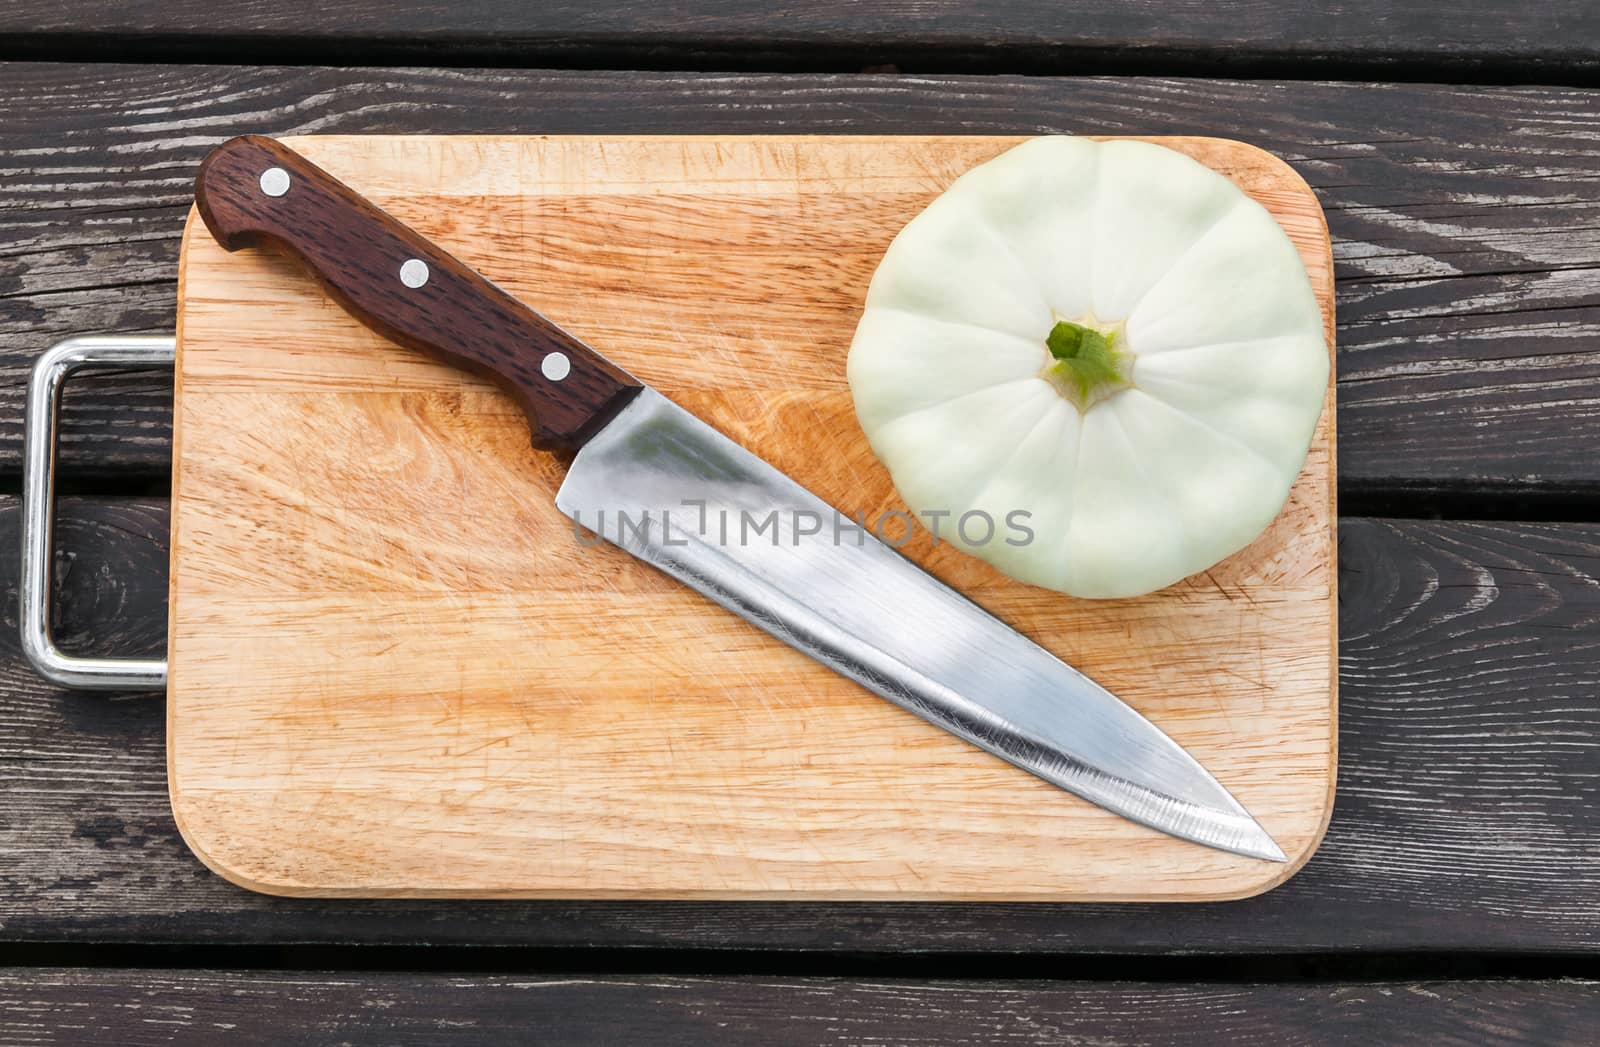 Squash on a cutting board  wooden background with  steel knif by zeffss